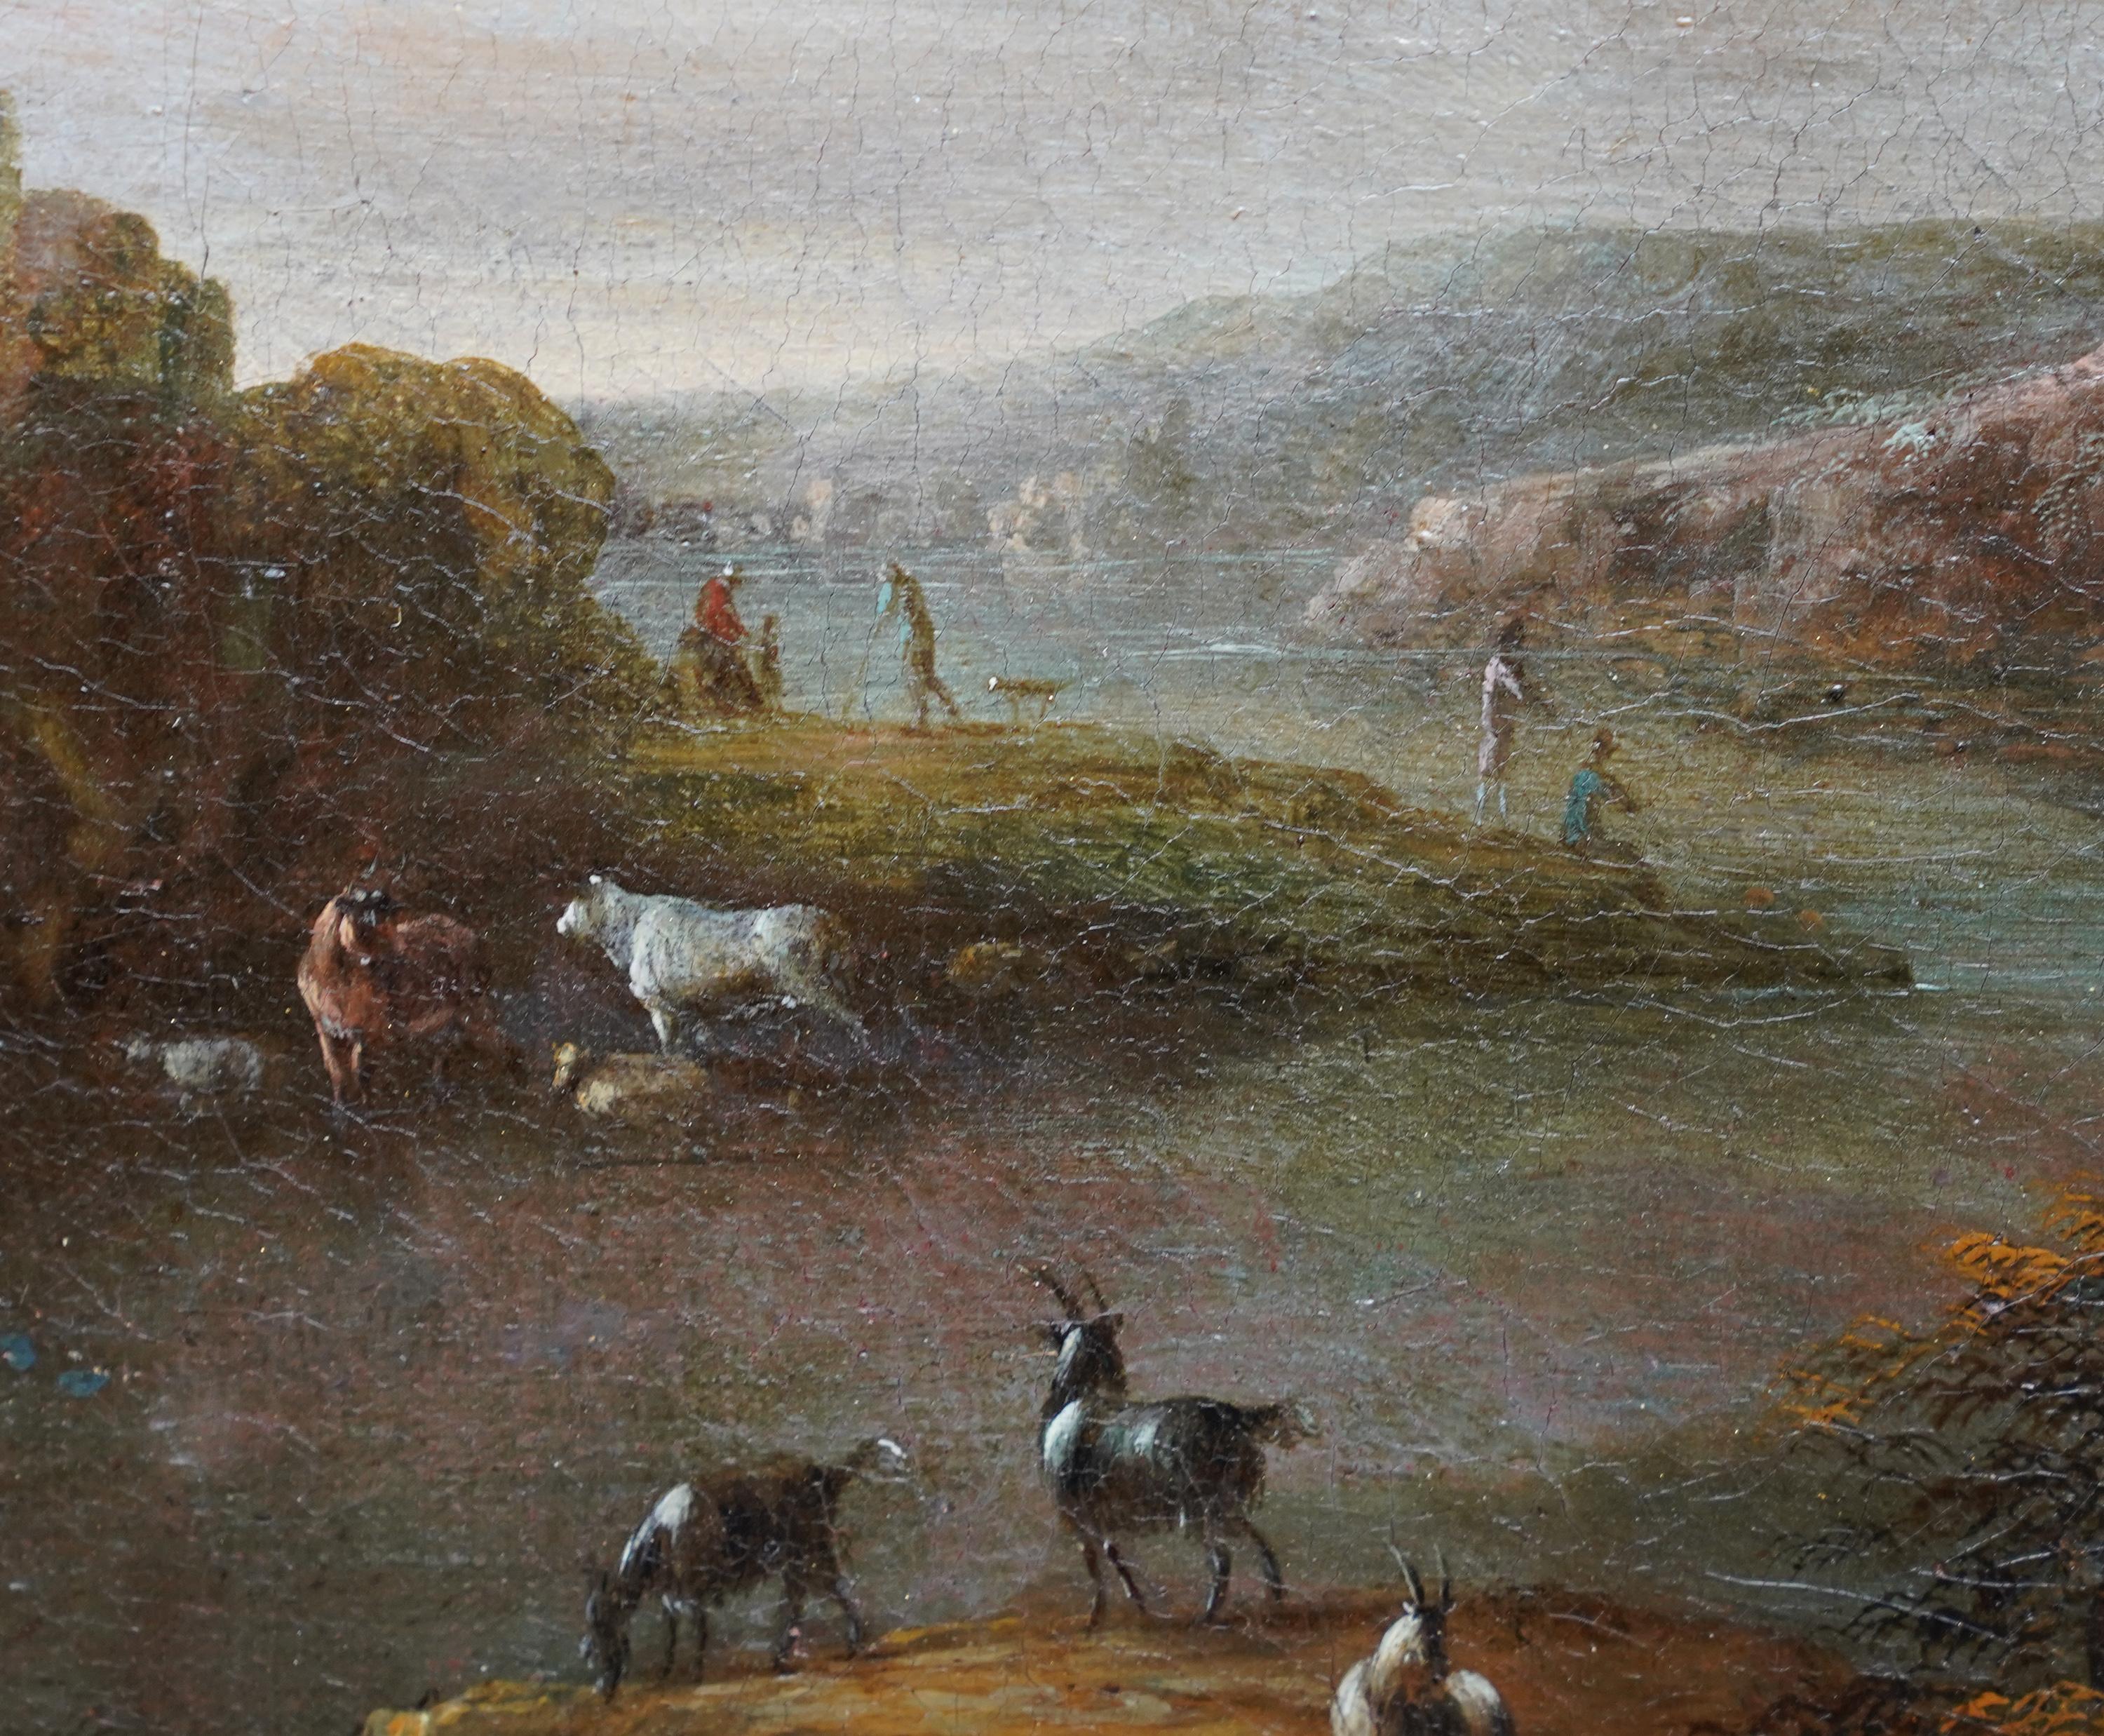 Travellers and Dogs in Landscape, Ruins on Right - Dutch Old Master oil painting For Sale 3